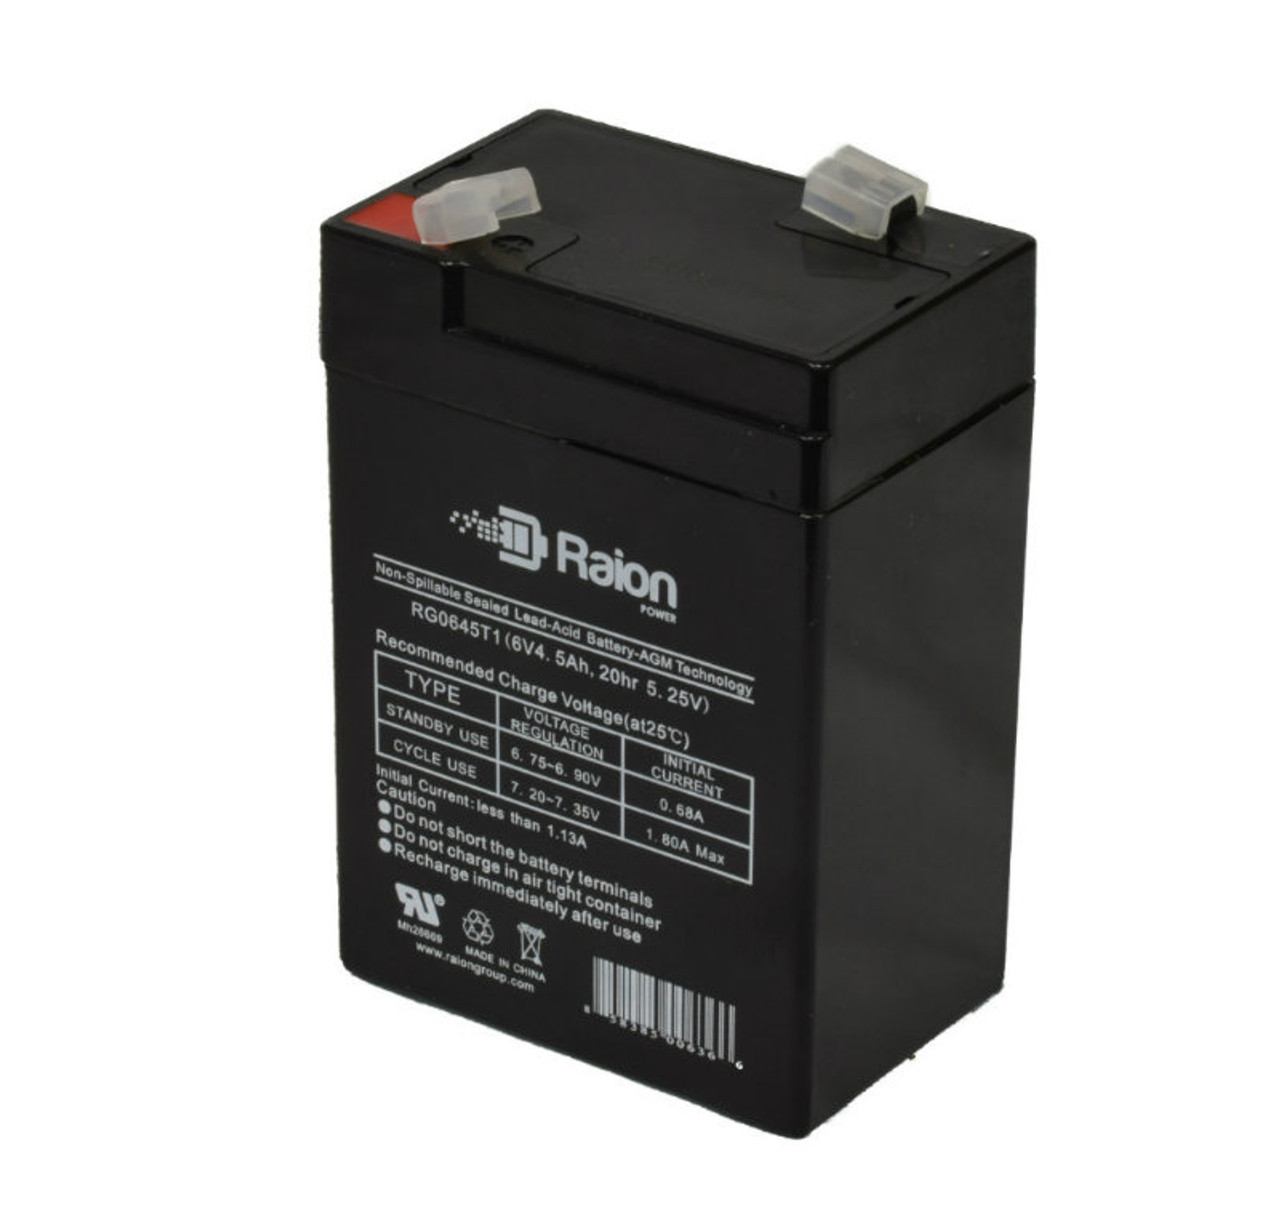 Raion Power RG0645T1 6V 4.5Ah Replacement Battery Cartridge for Sure-Lites SL026117